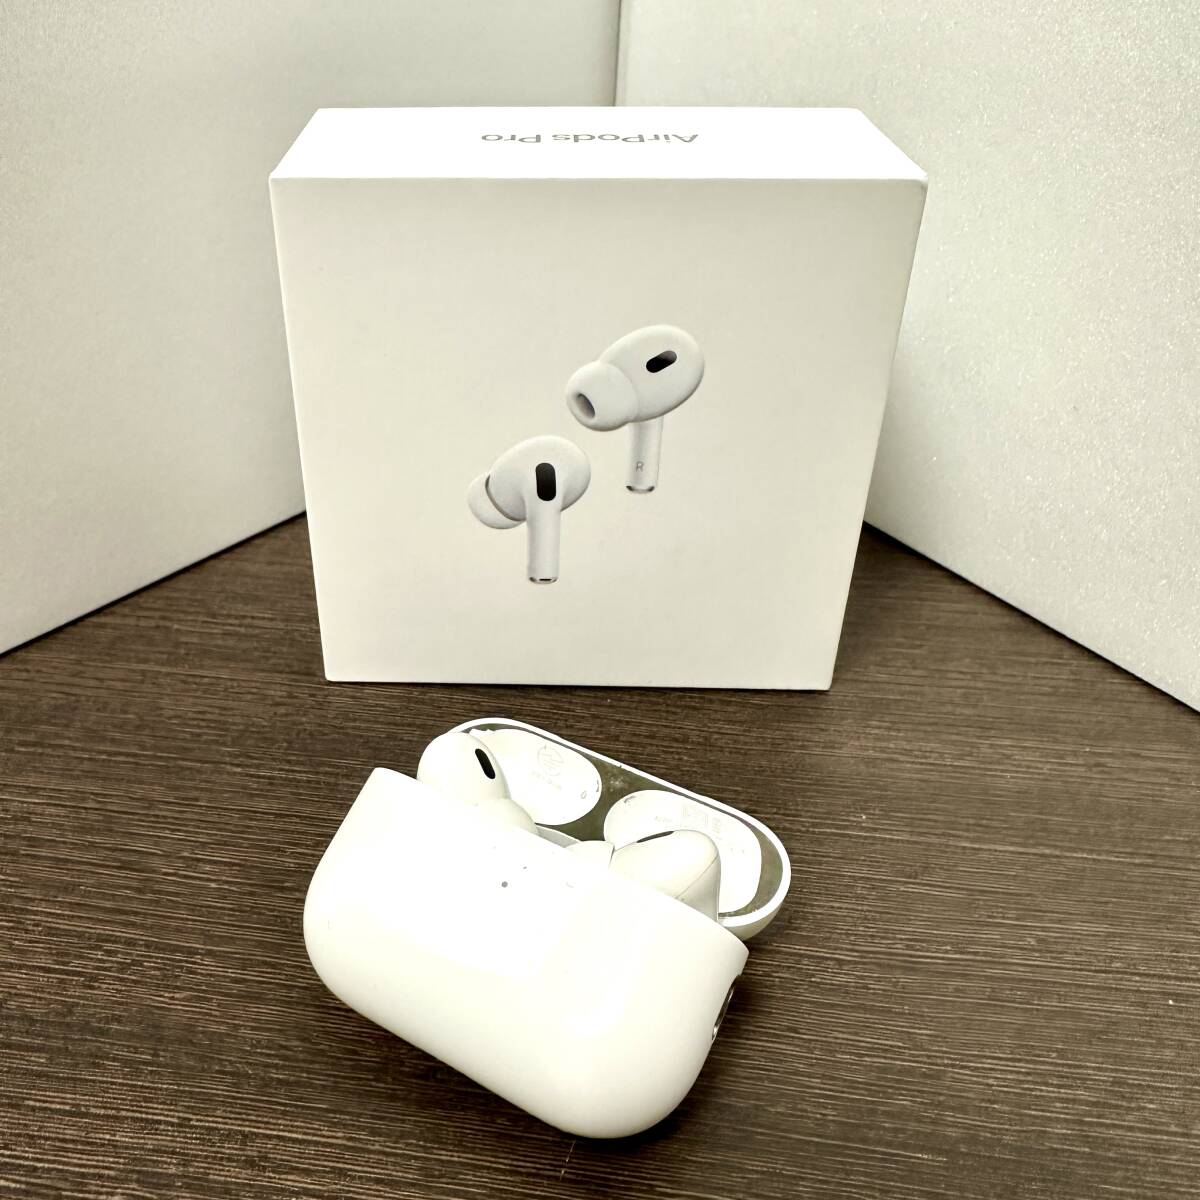 ☆★H1587【送料込み】Apple AirPods Pro MQD83J/A A2700 A2698 A2699 第2世代 AirPods Pro MagSafe 充電ケース ケーブル・箱付き